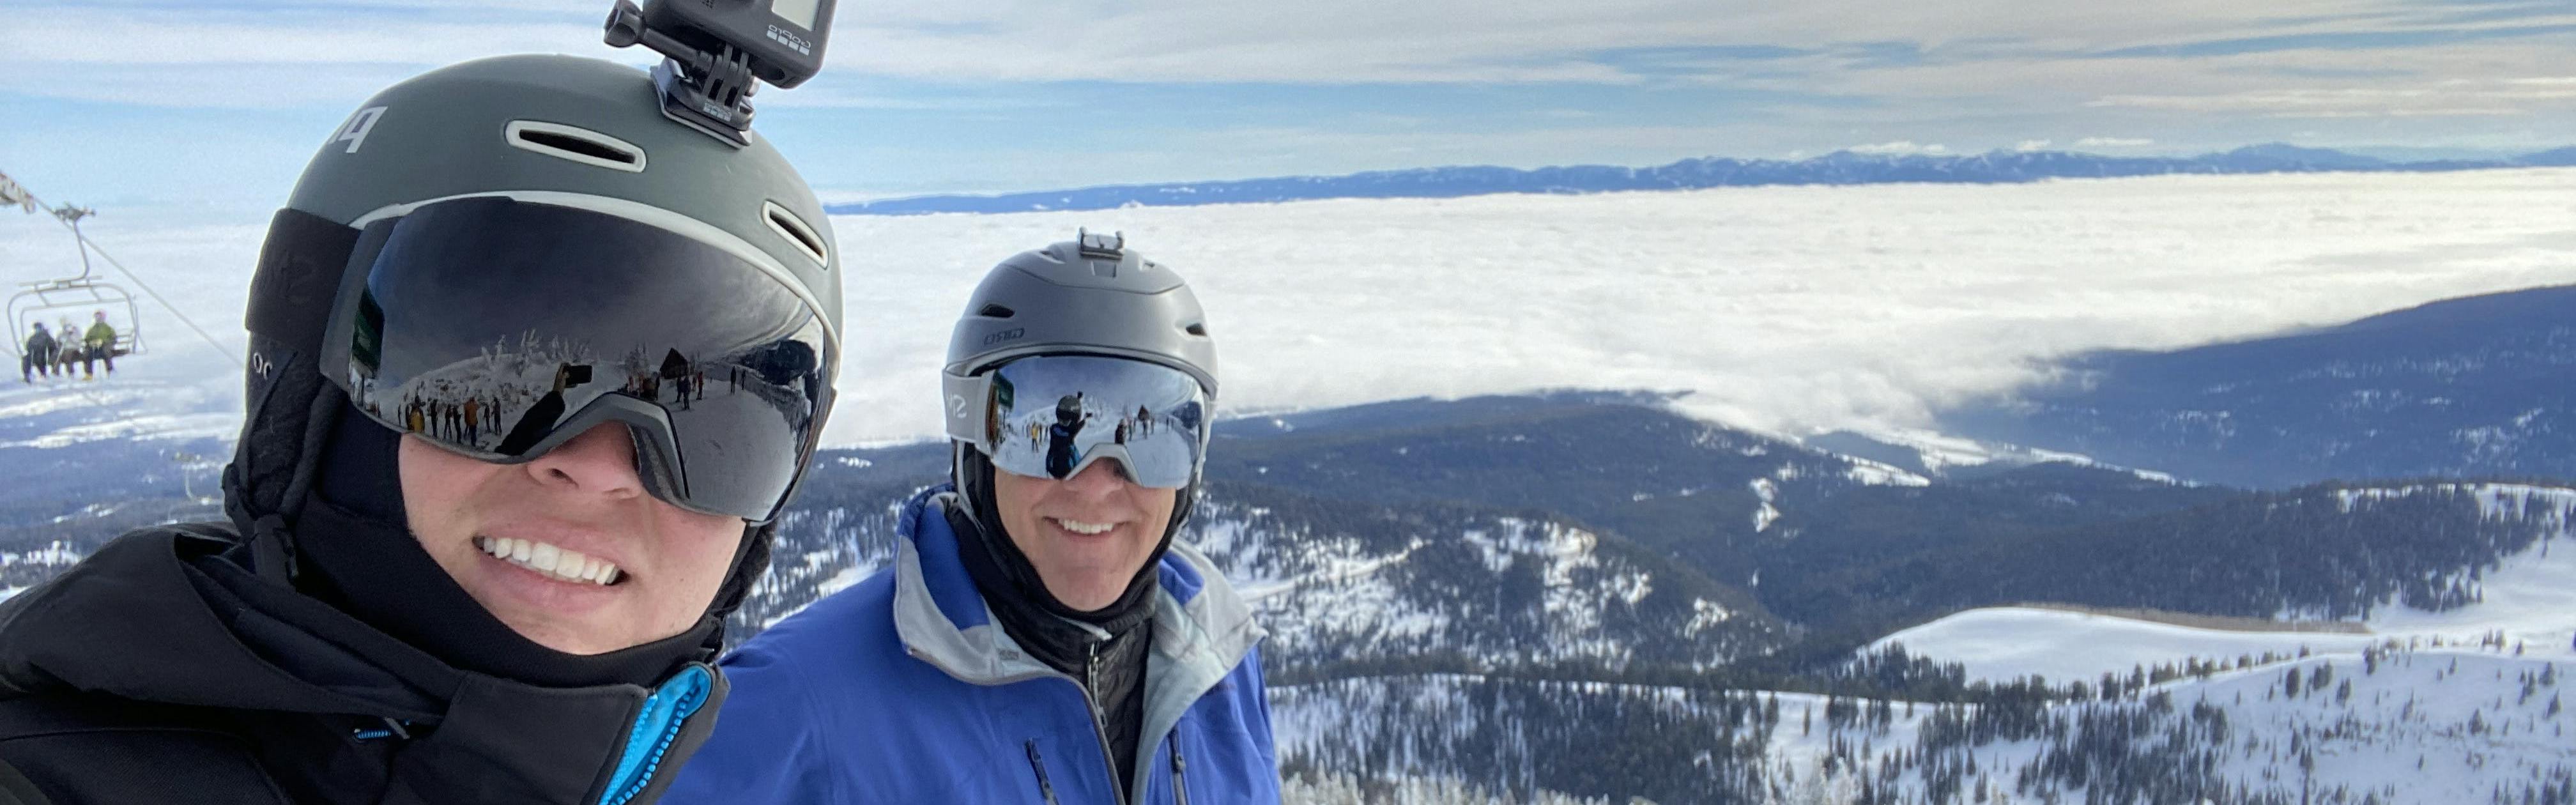 The author takes a selfie with his dad while they wear ski helmets.